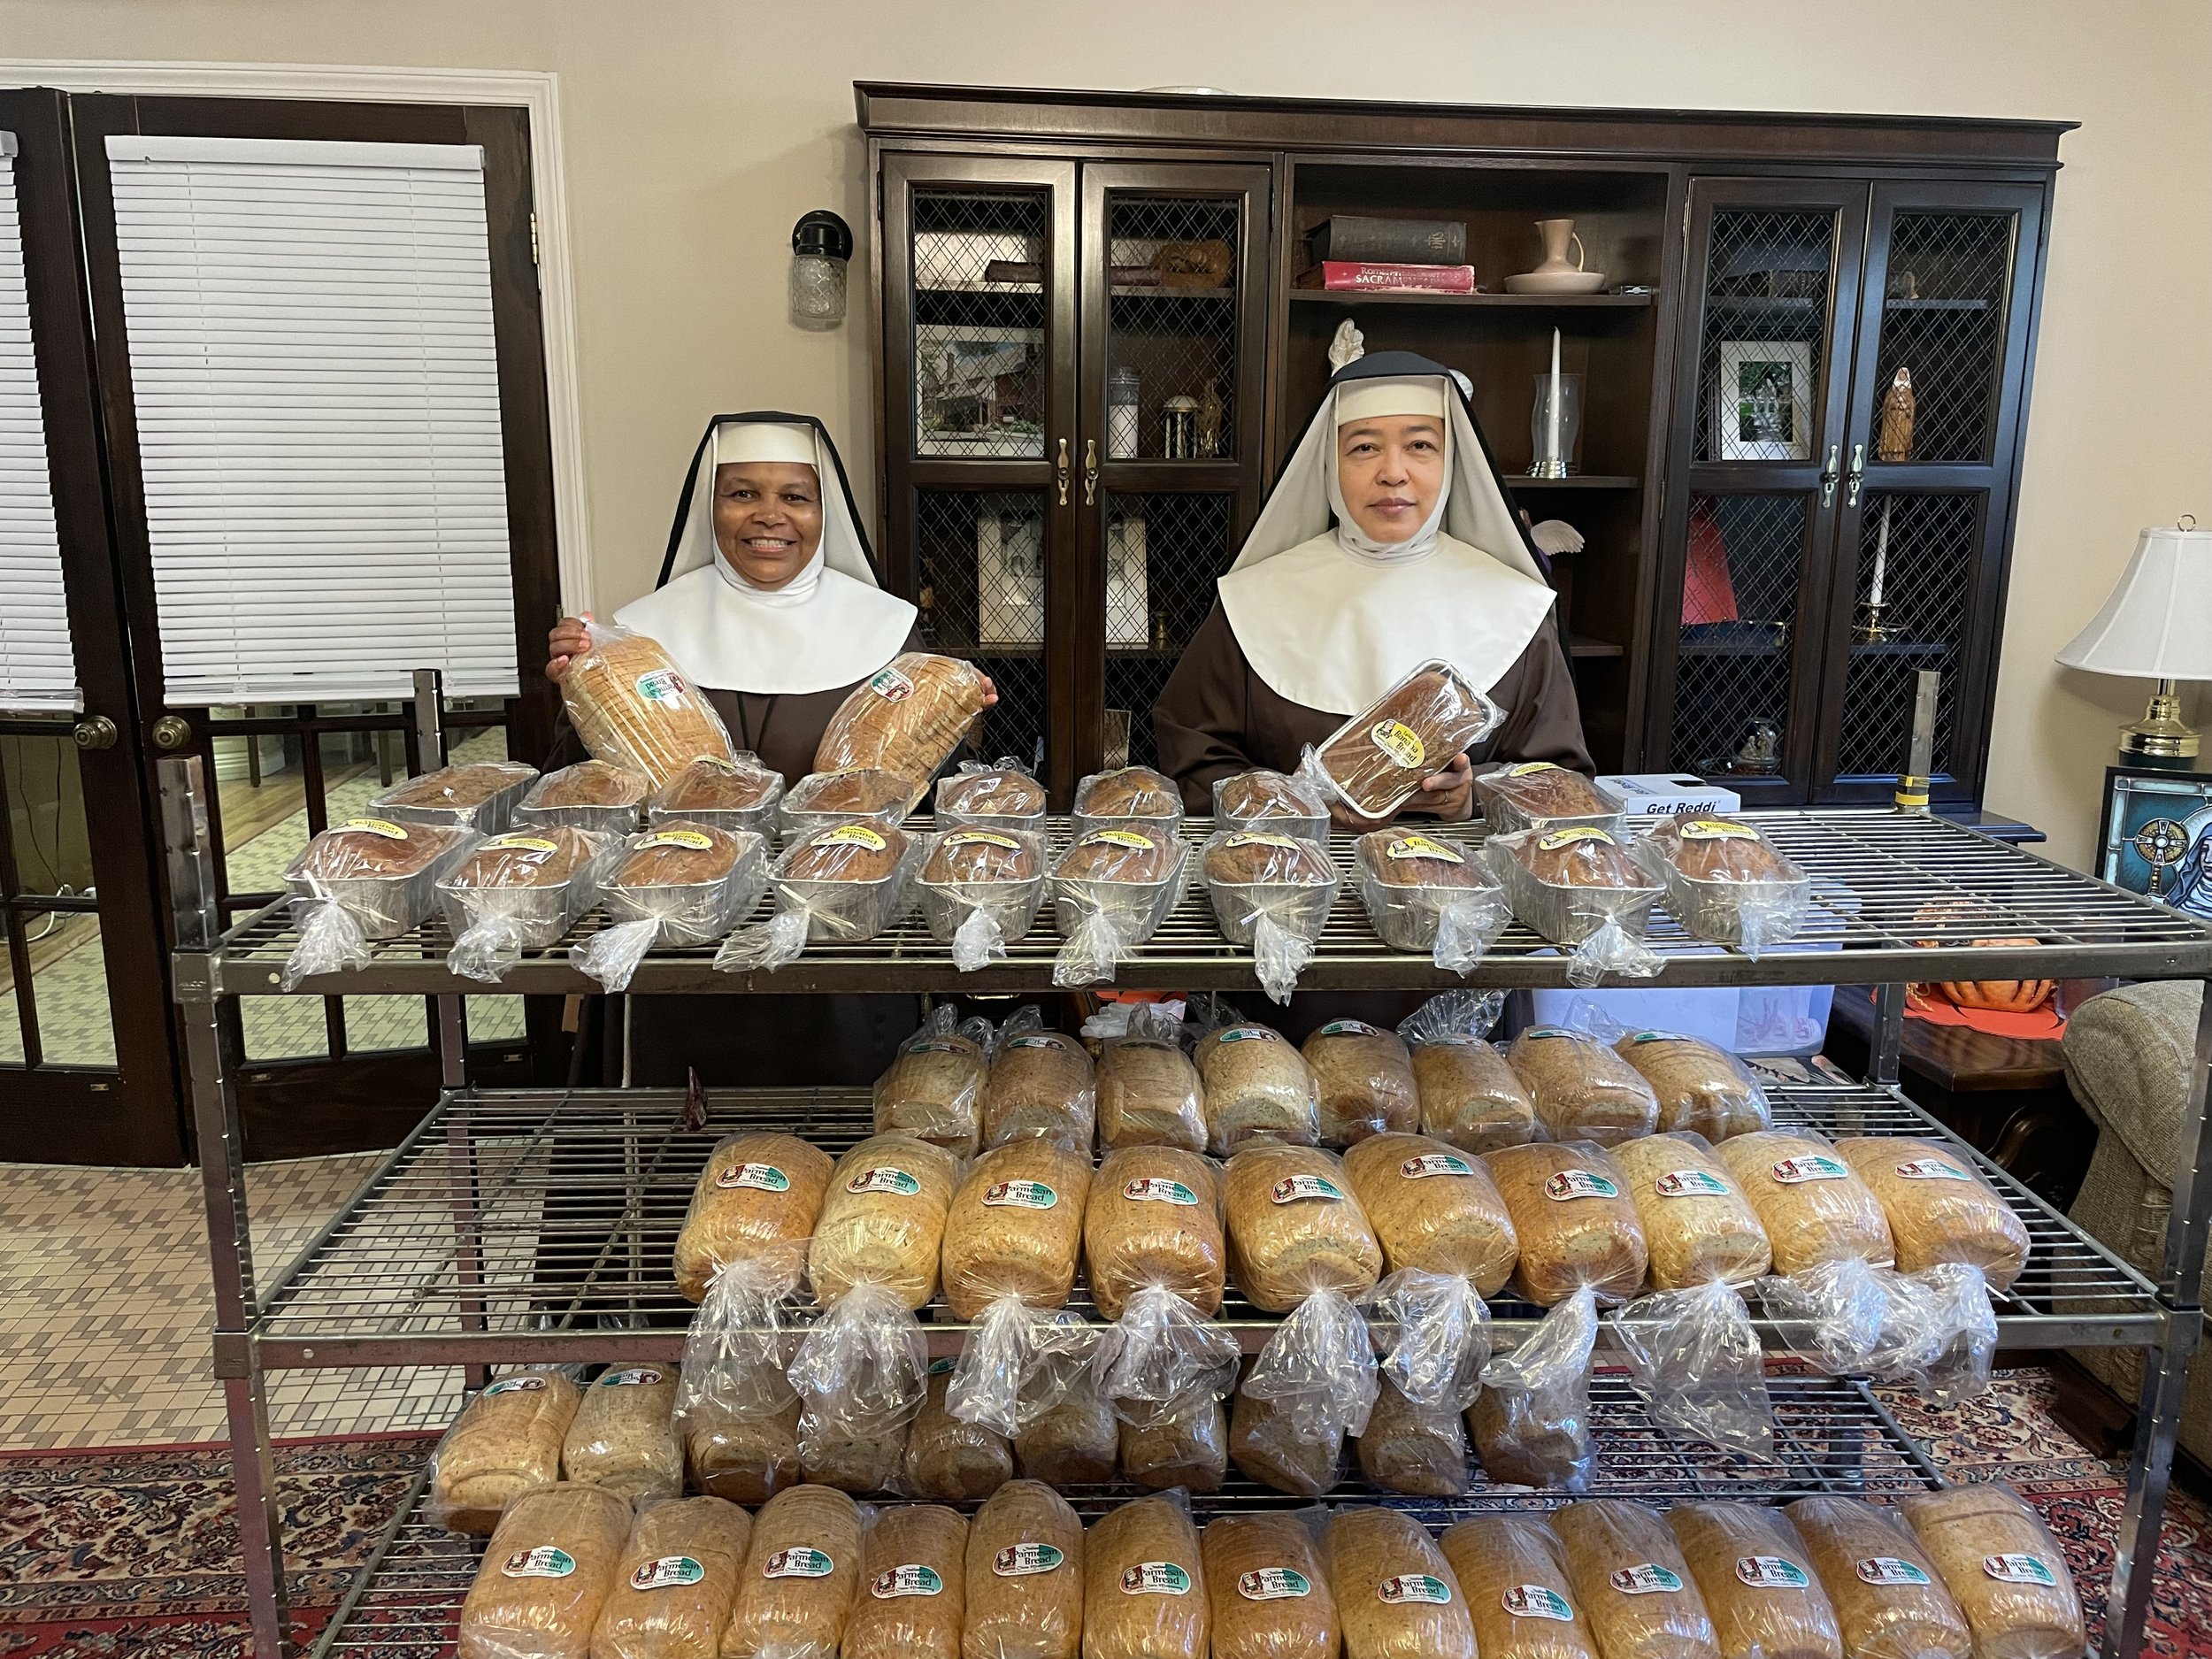  Sr. Mary Clare and Sr. Maria Teresina who are also part of the bread crew showing off the fruits of their labor…again no 2 AM wake up call for this Sister to take actual bread making pictures. 